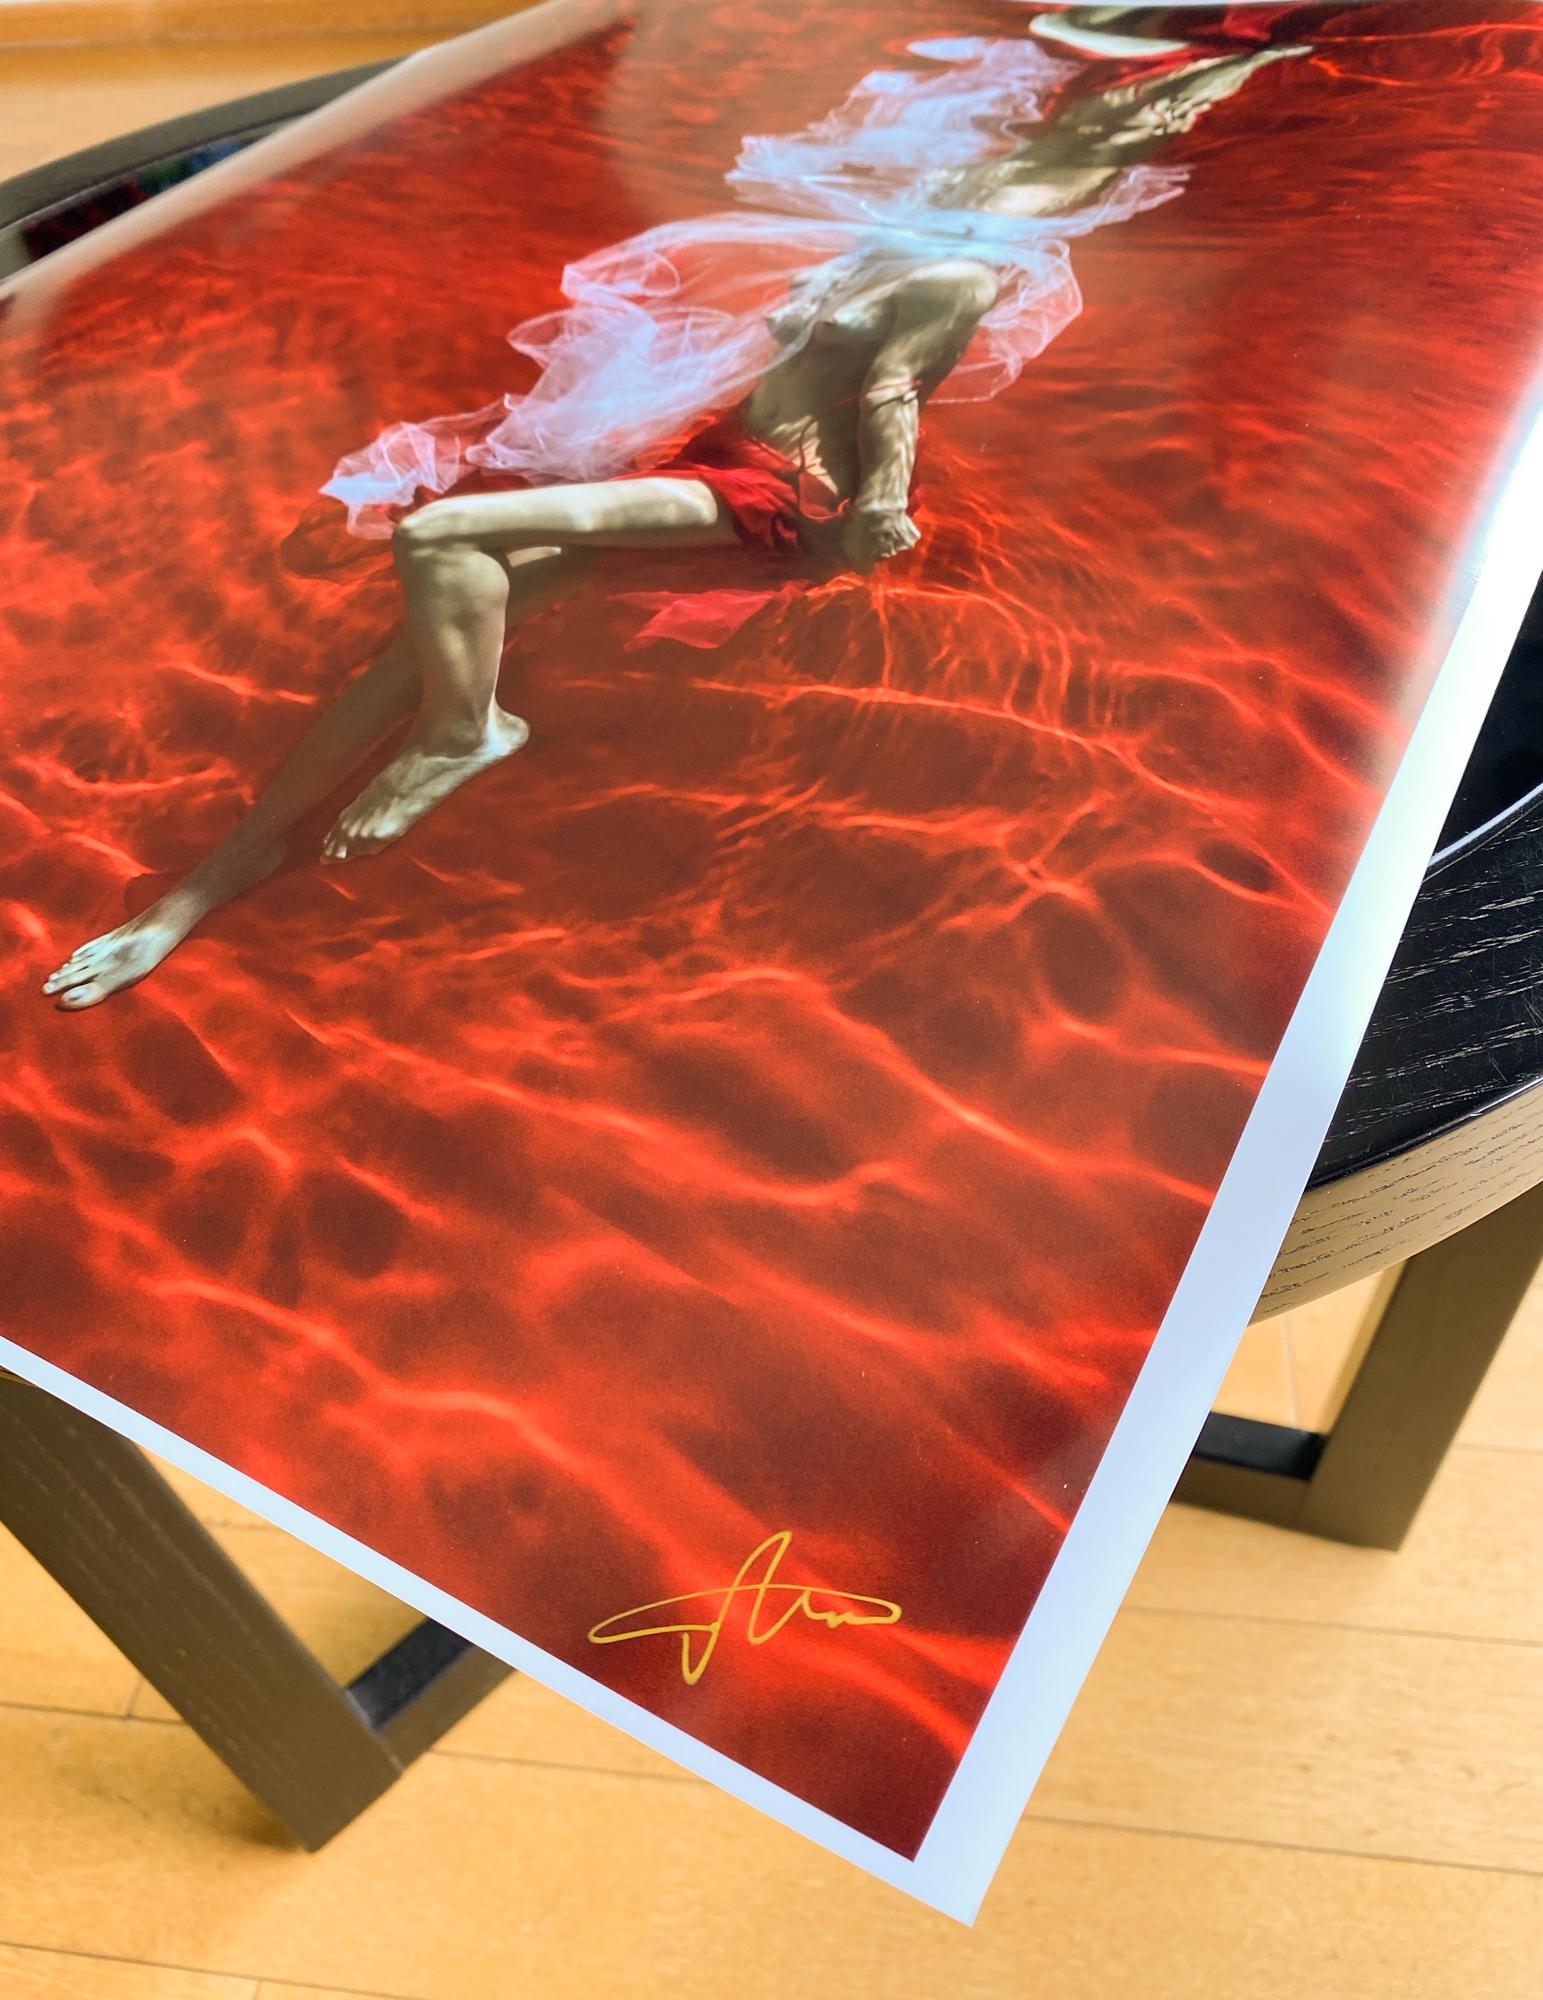 Blood and Milk III - underwater nude photograph - print on paper 48 x 35